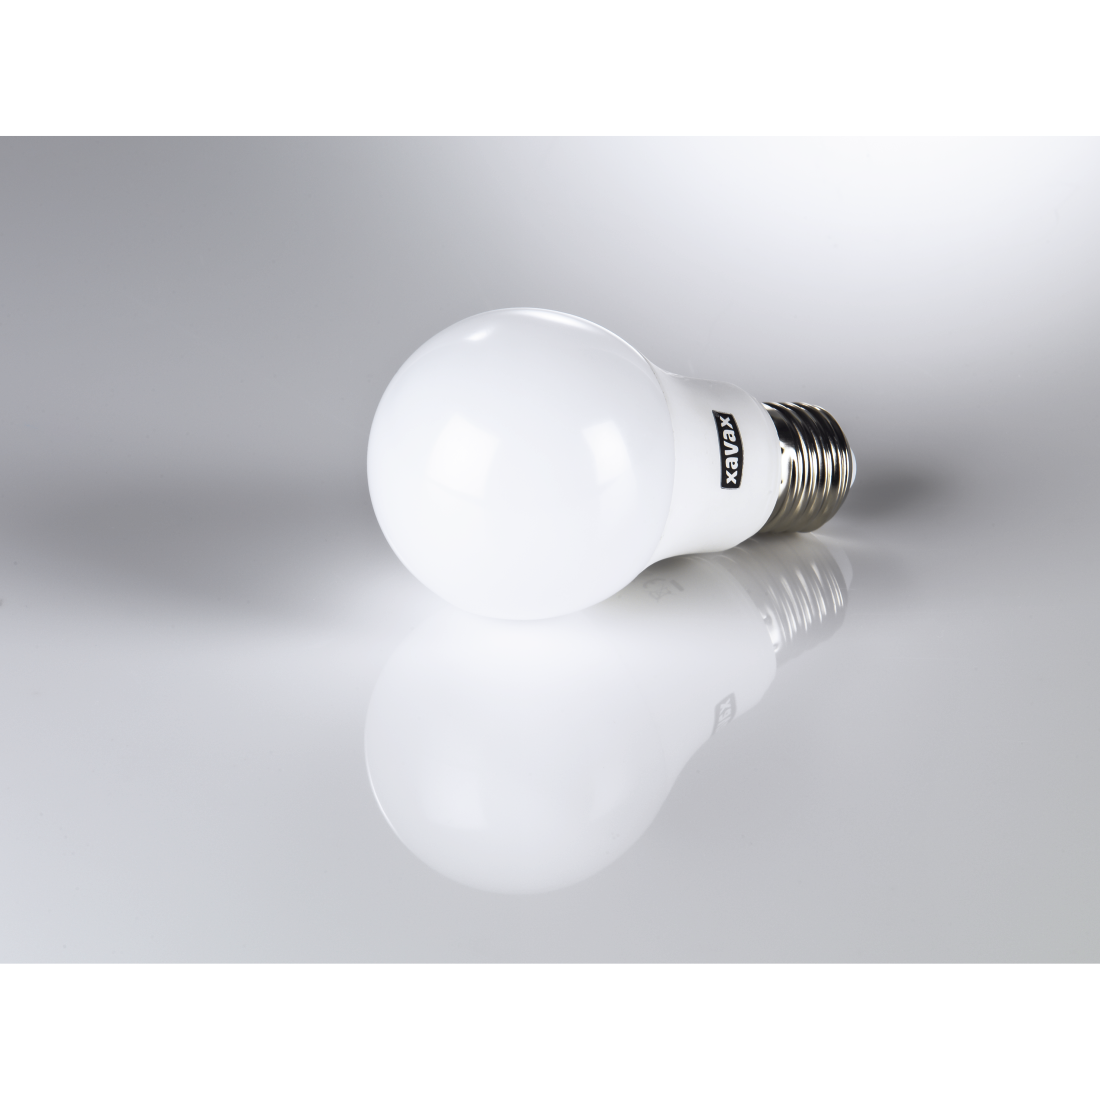 abx3 High-Res Image 3 - Xavax, LED Bulb, E27, 806 lm Replaces 60W, Incandescent Bulb, warm white